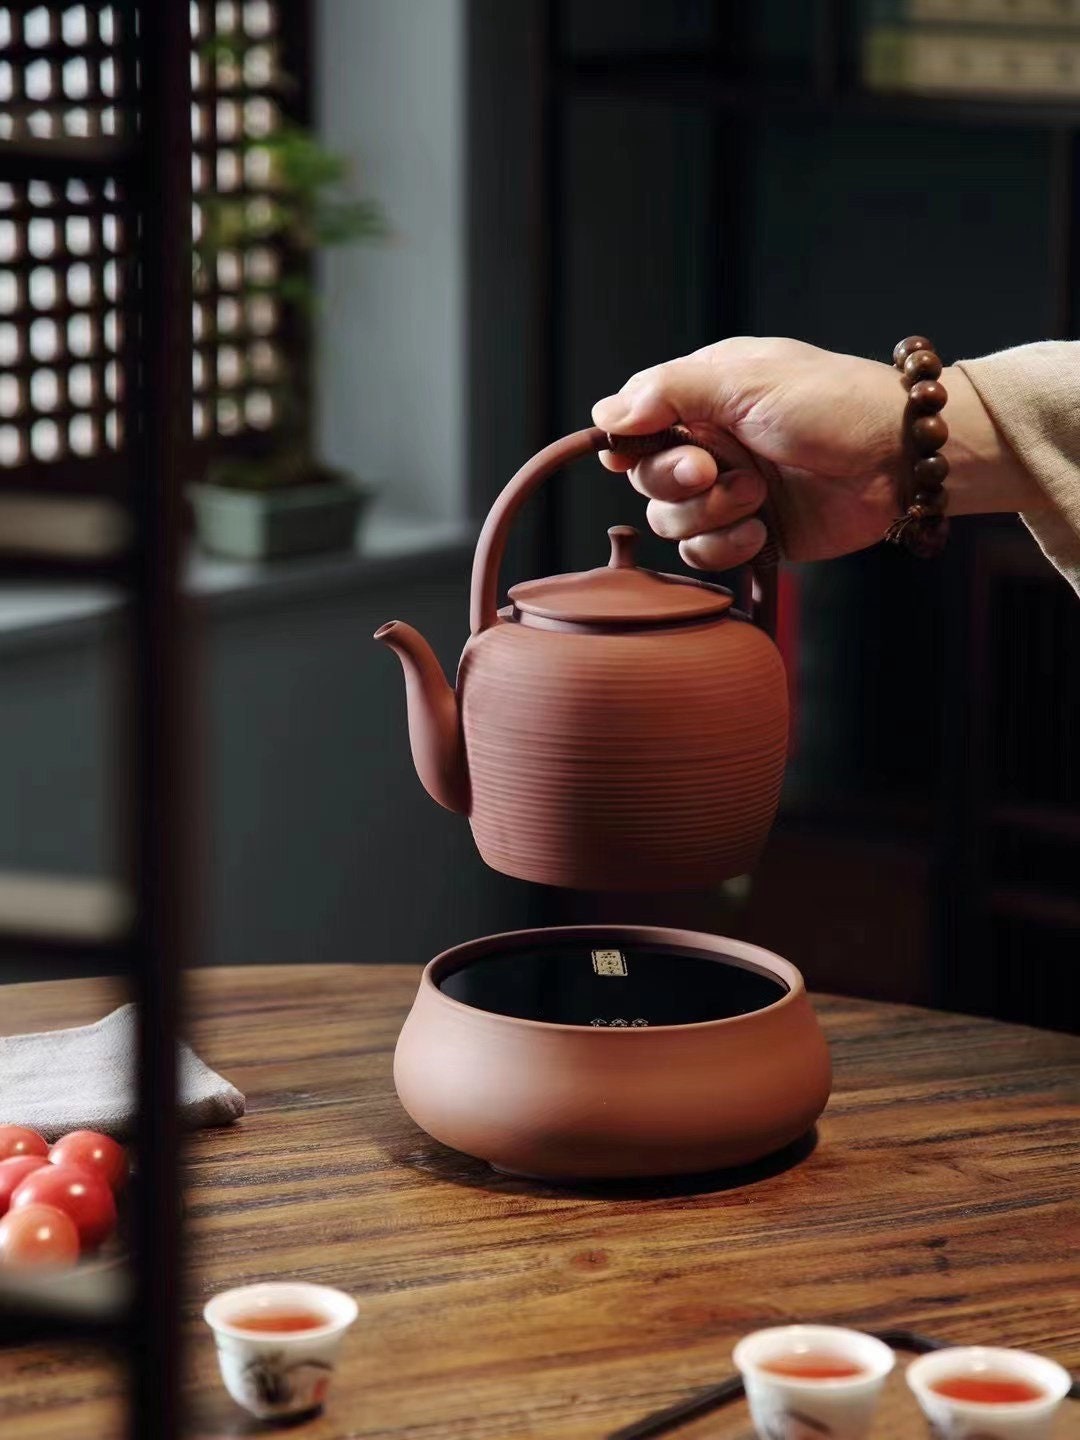 Ceramic Electrical Kettle